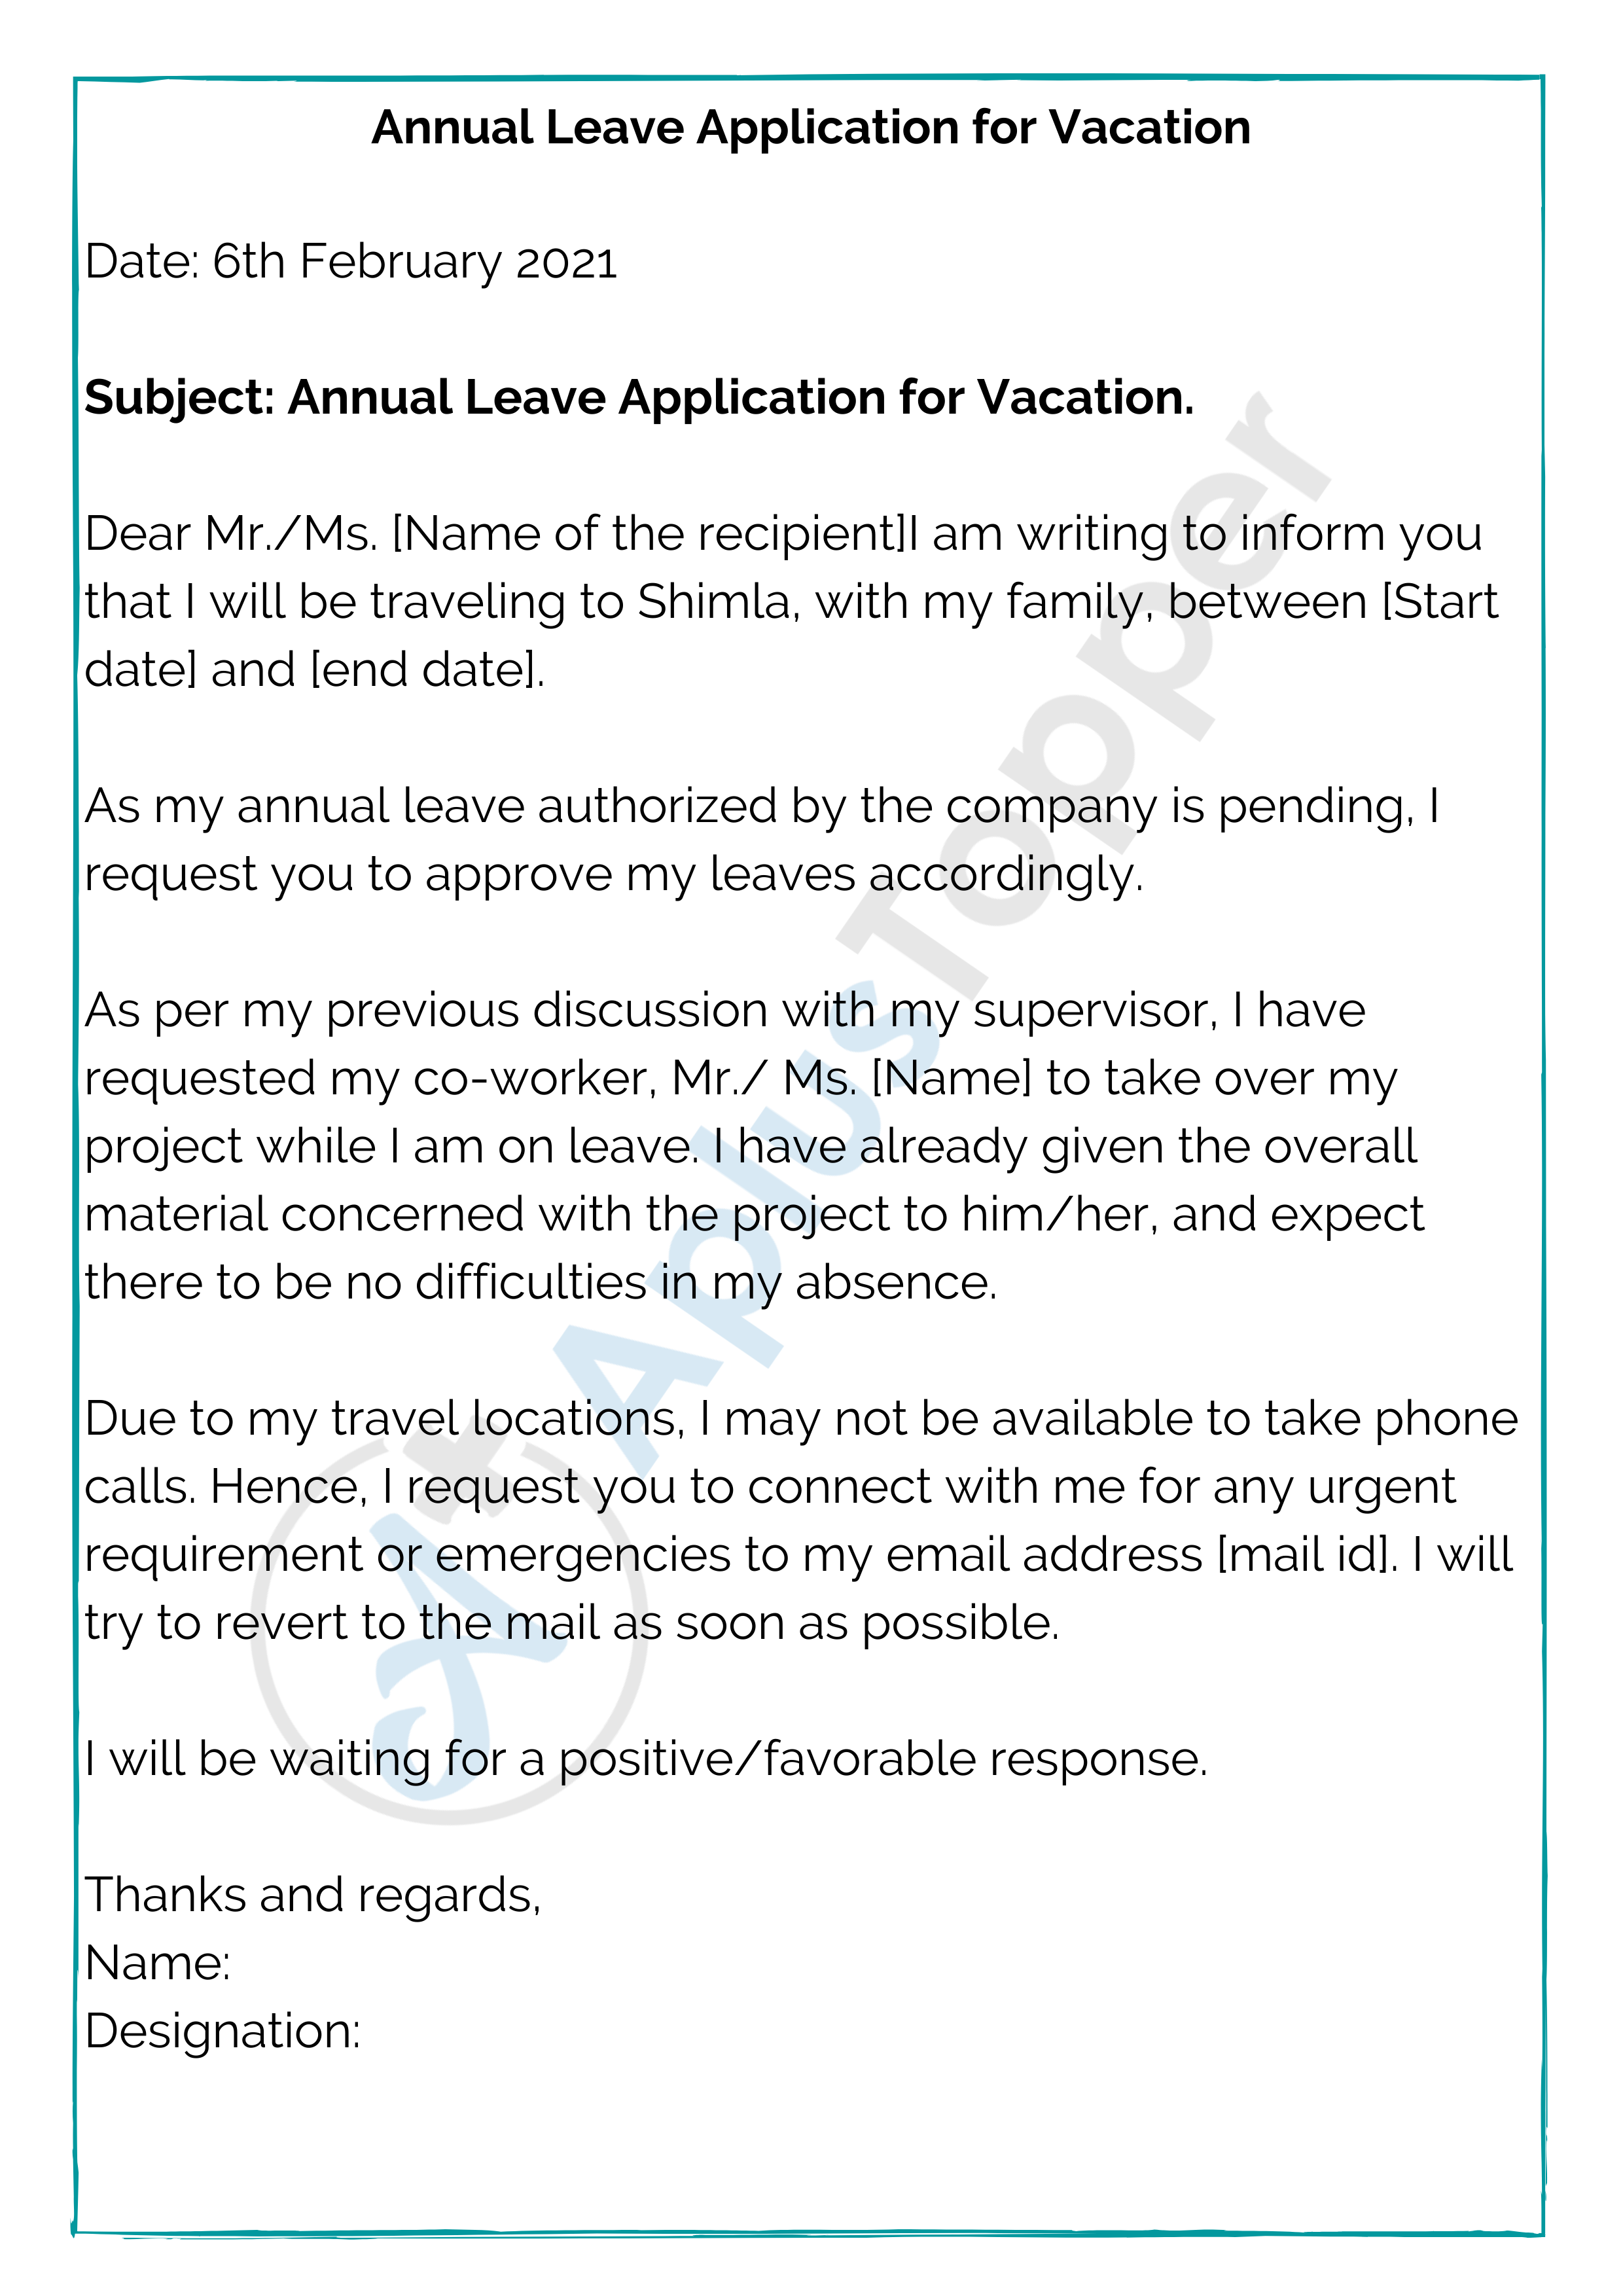 Annual Leave Application  Format, Samples  Annual Leave